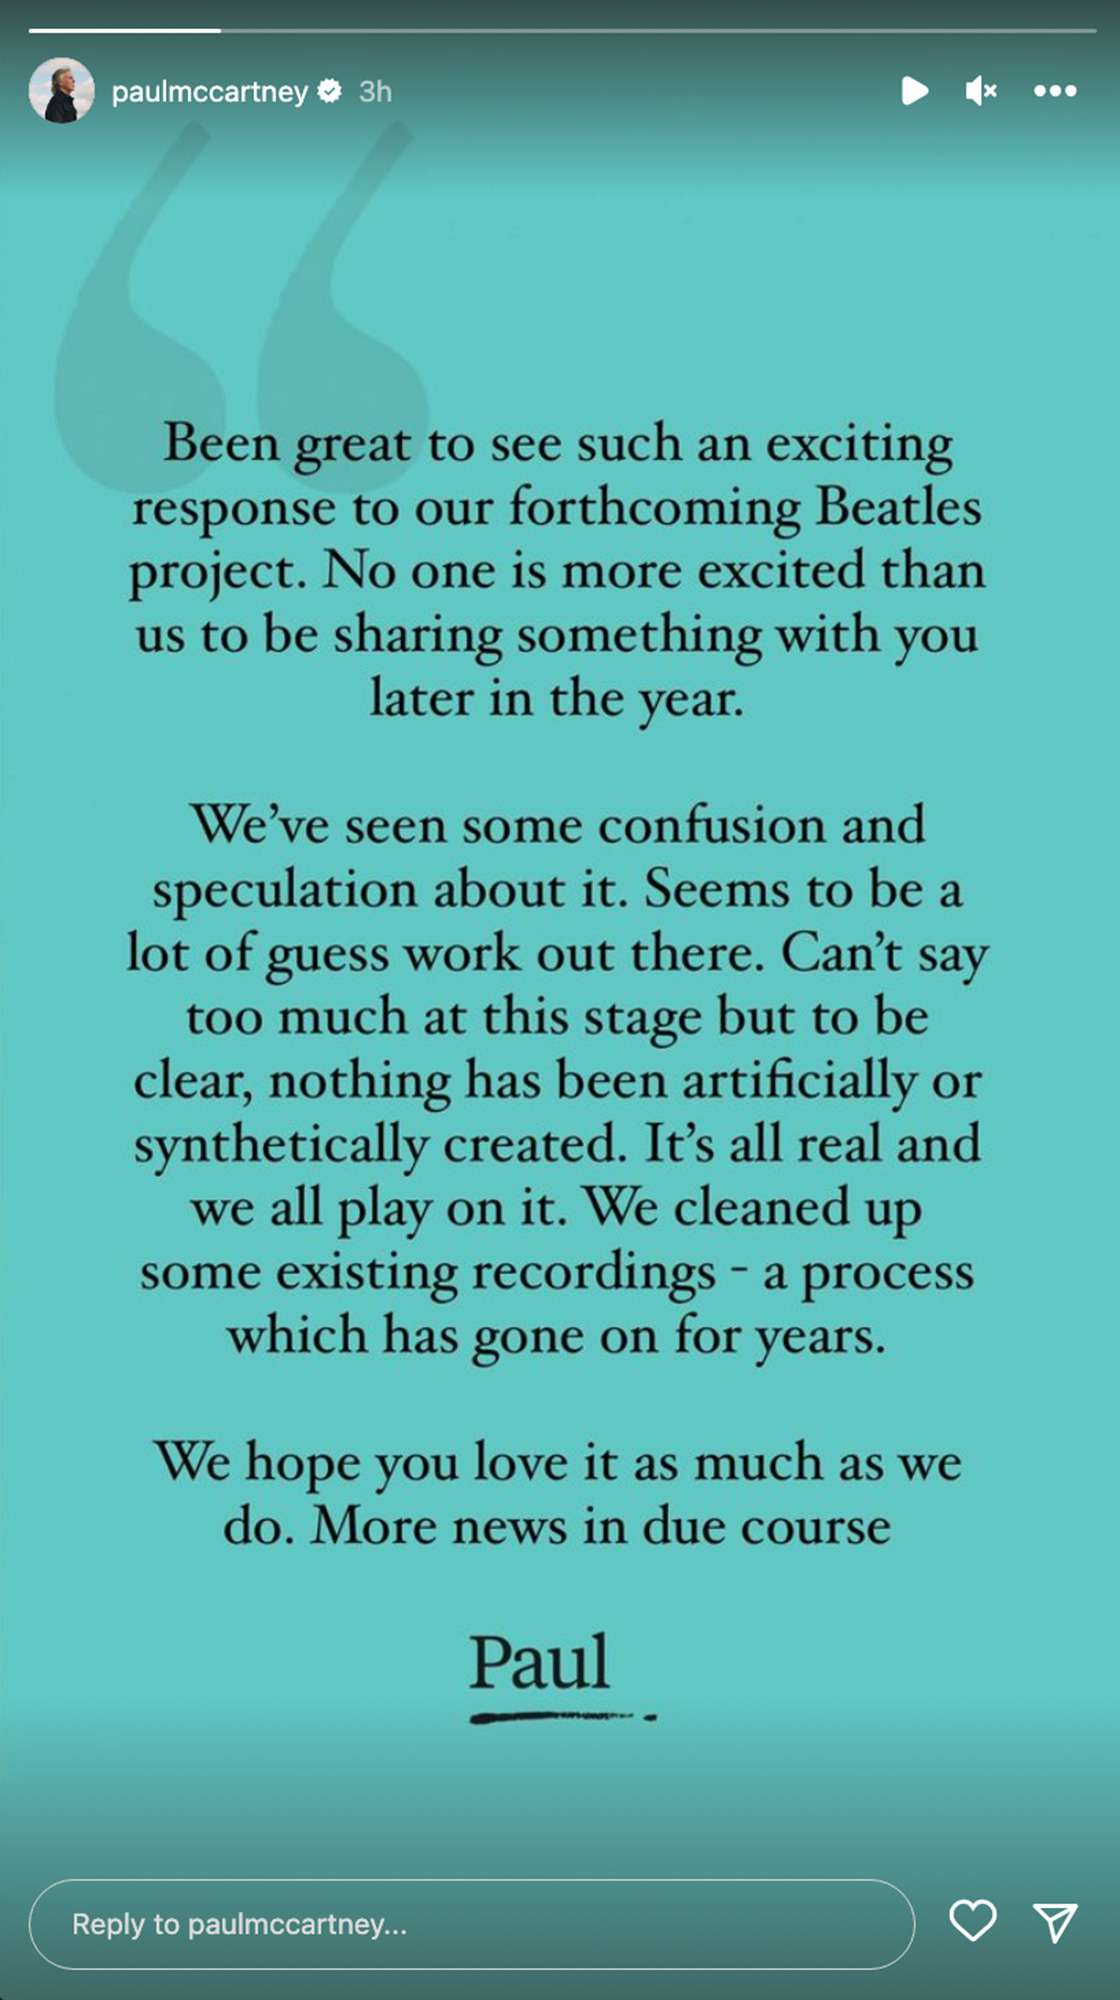 Paul McCartney's Instagram Story about the new Beatles song